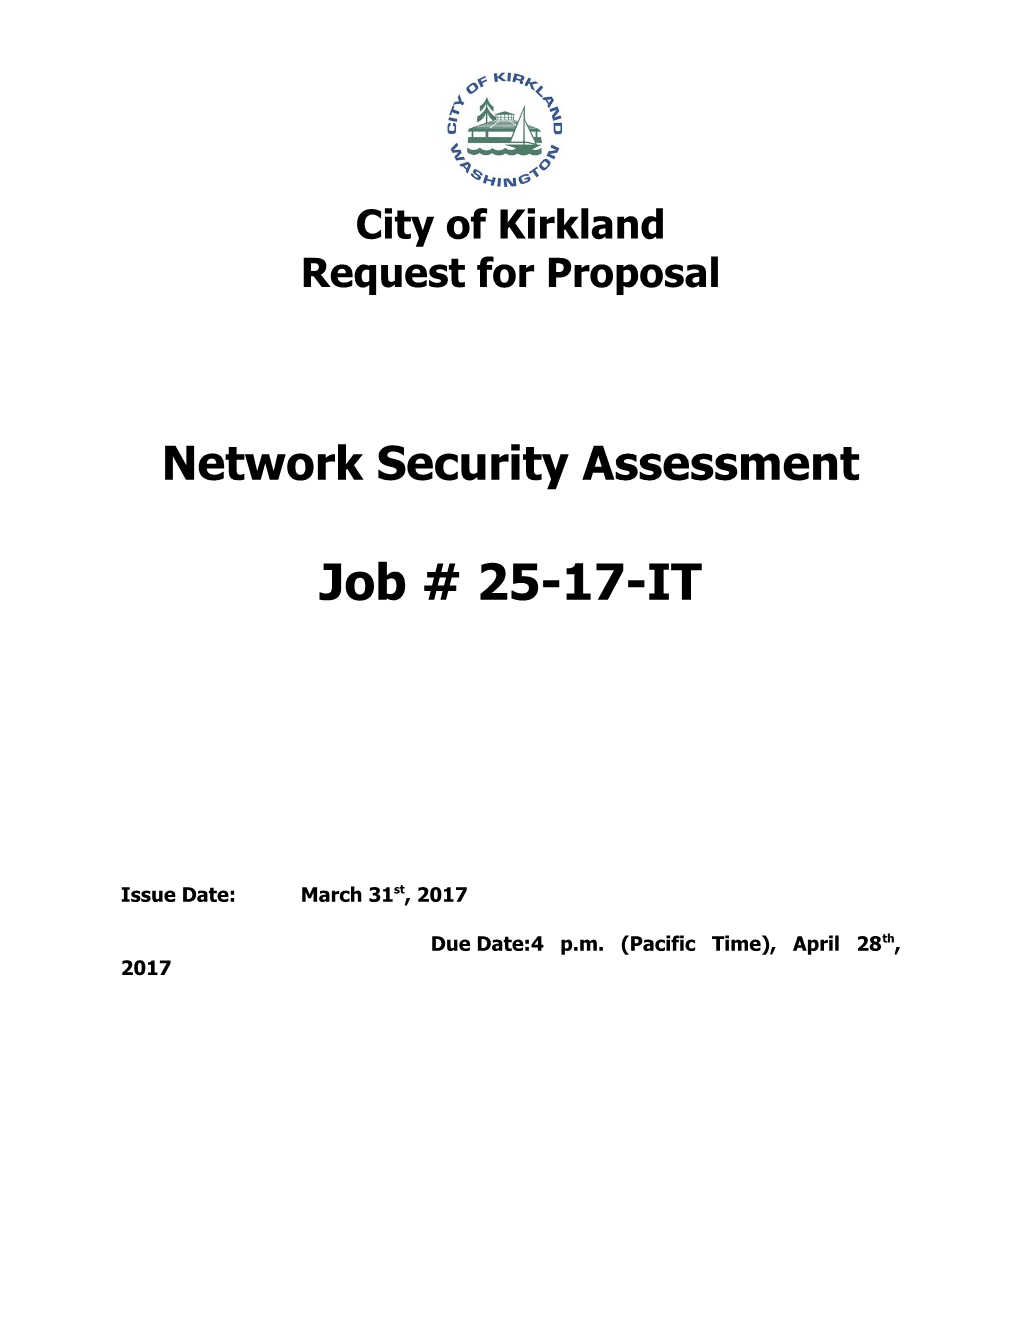 Network Security Assessment RFP